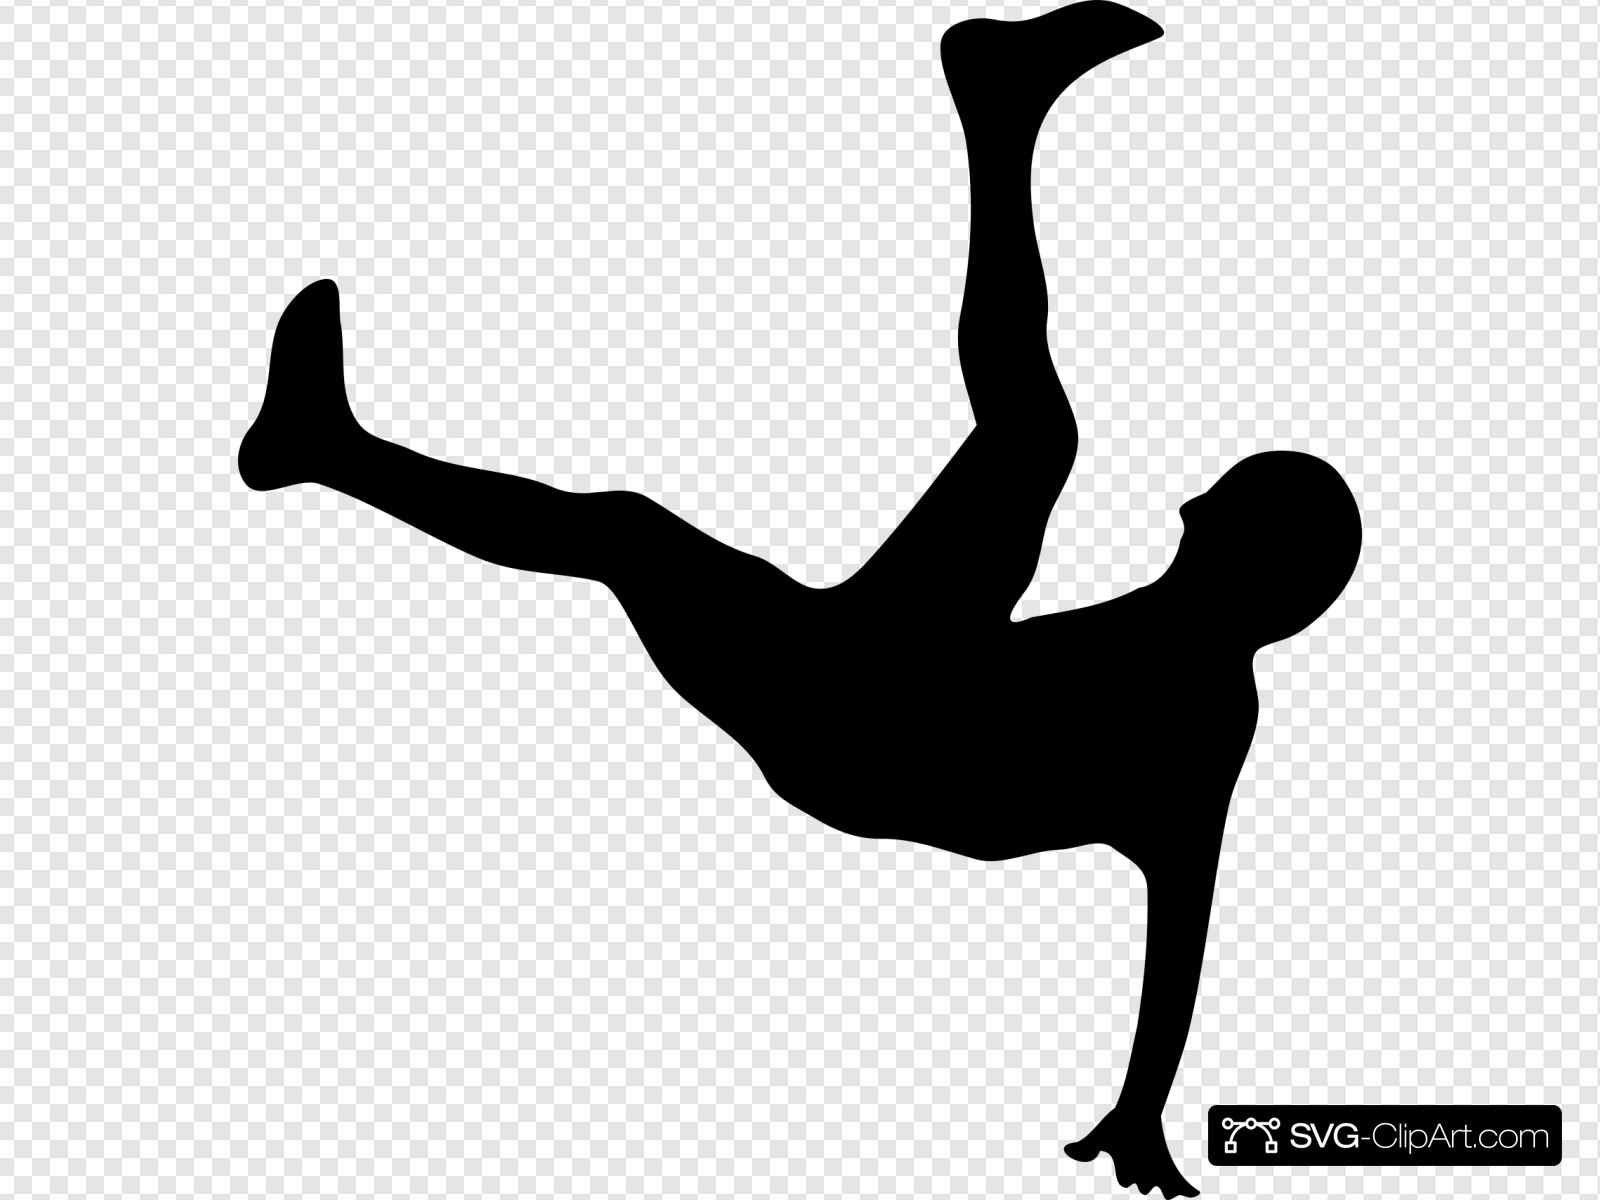 Man Falling Clip art, Icon and SVG.